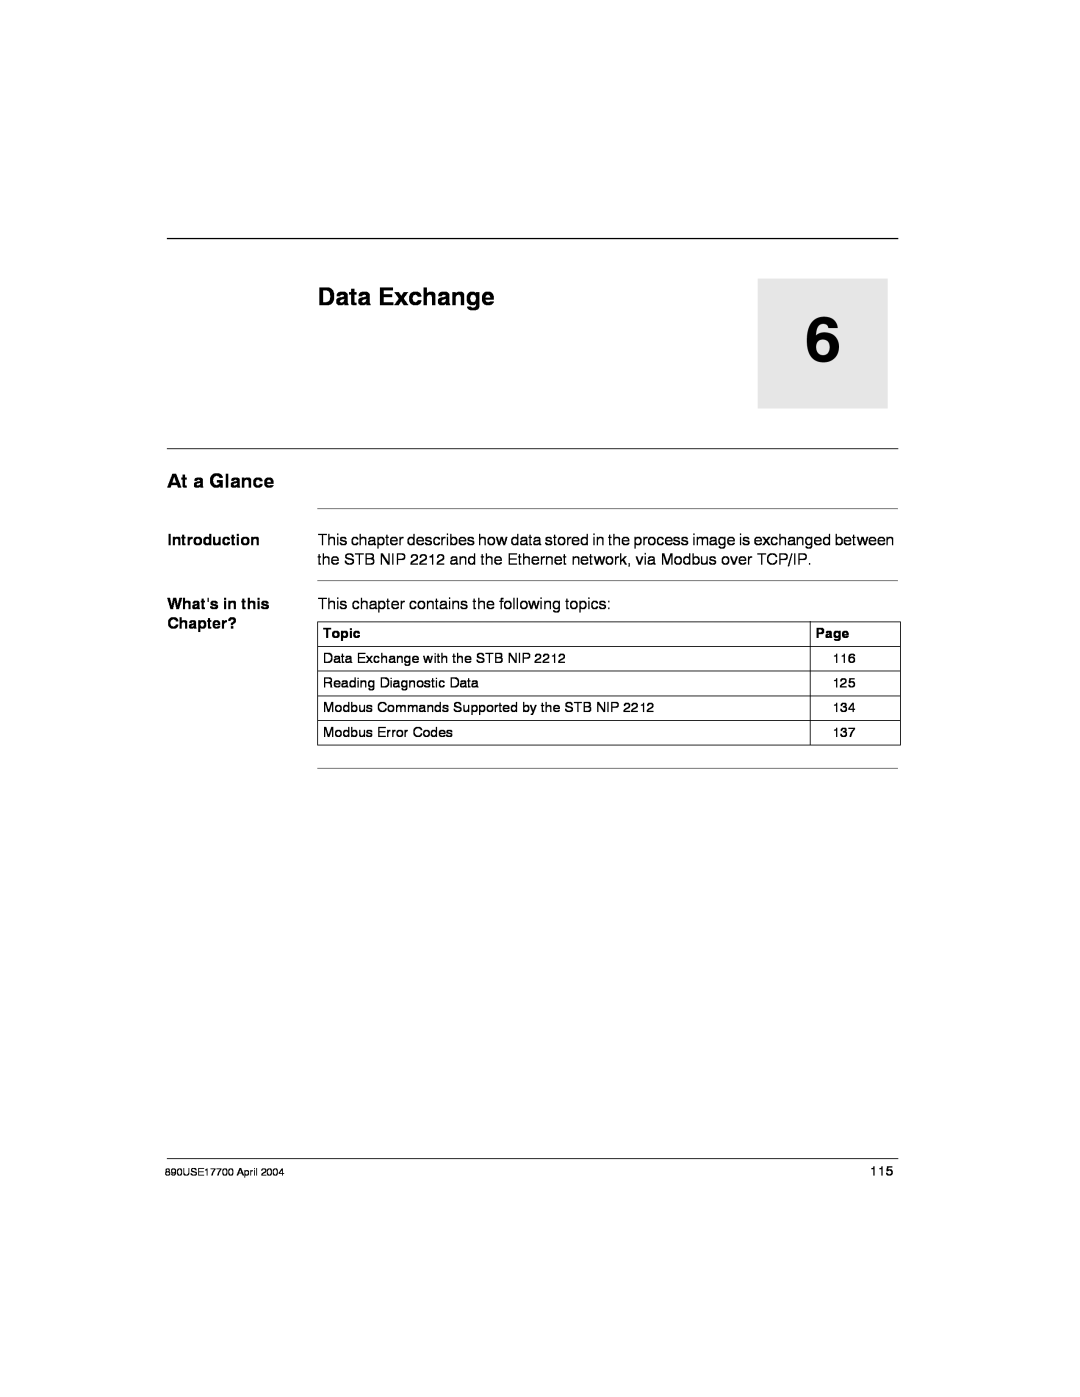 Schneider Electric manual At a Glance, Data Exchange with the STB NIP, Reading Diagnostic Data, 890USE17700 April 